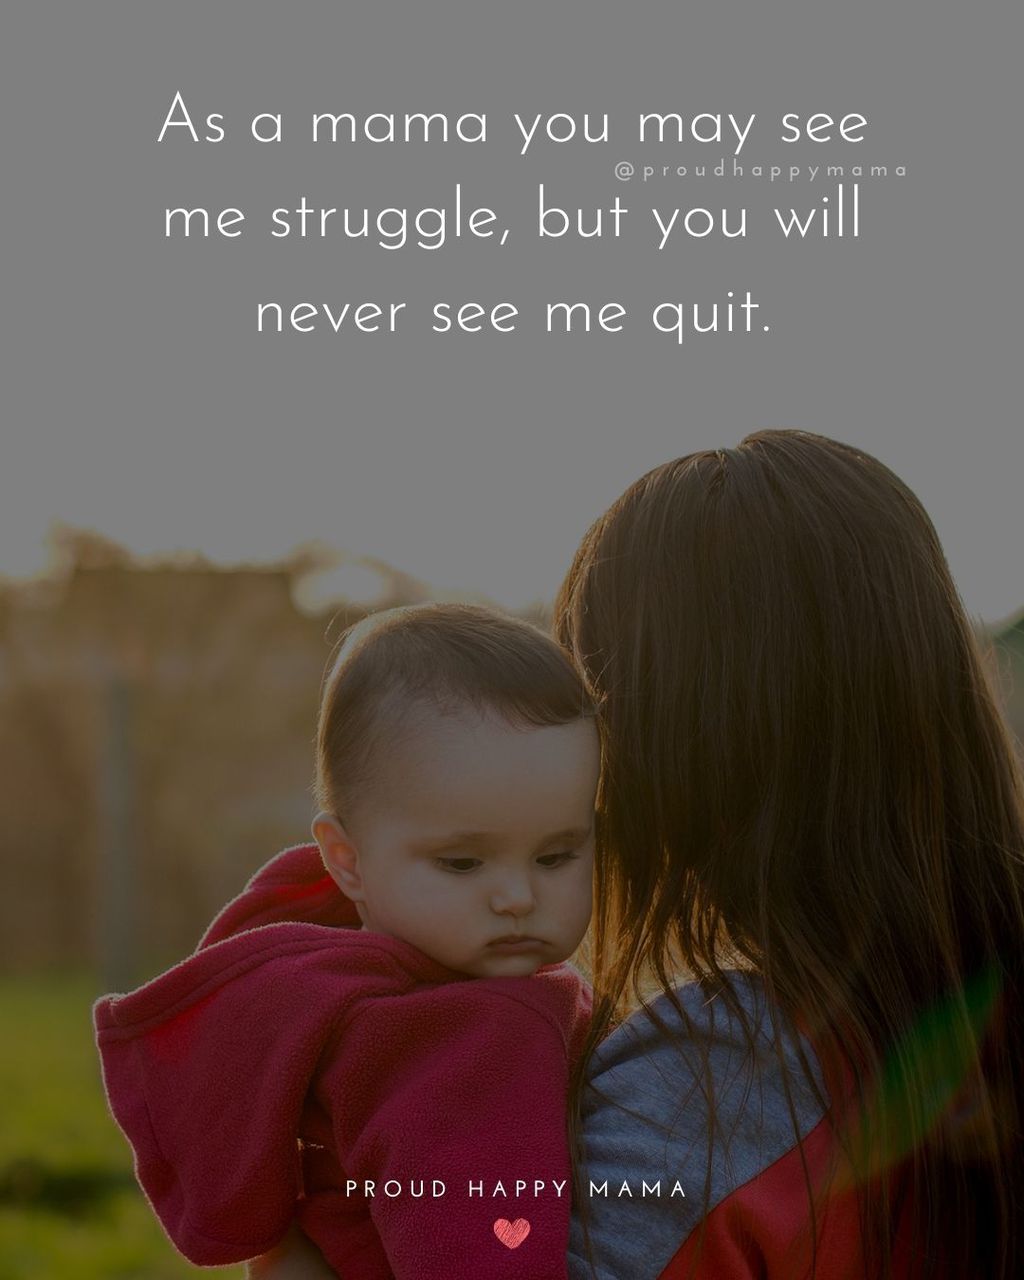 Strong Mom Quotes - As a mama you may see me struggle, but you will never see me quit.